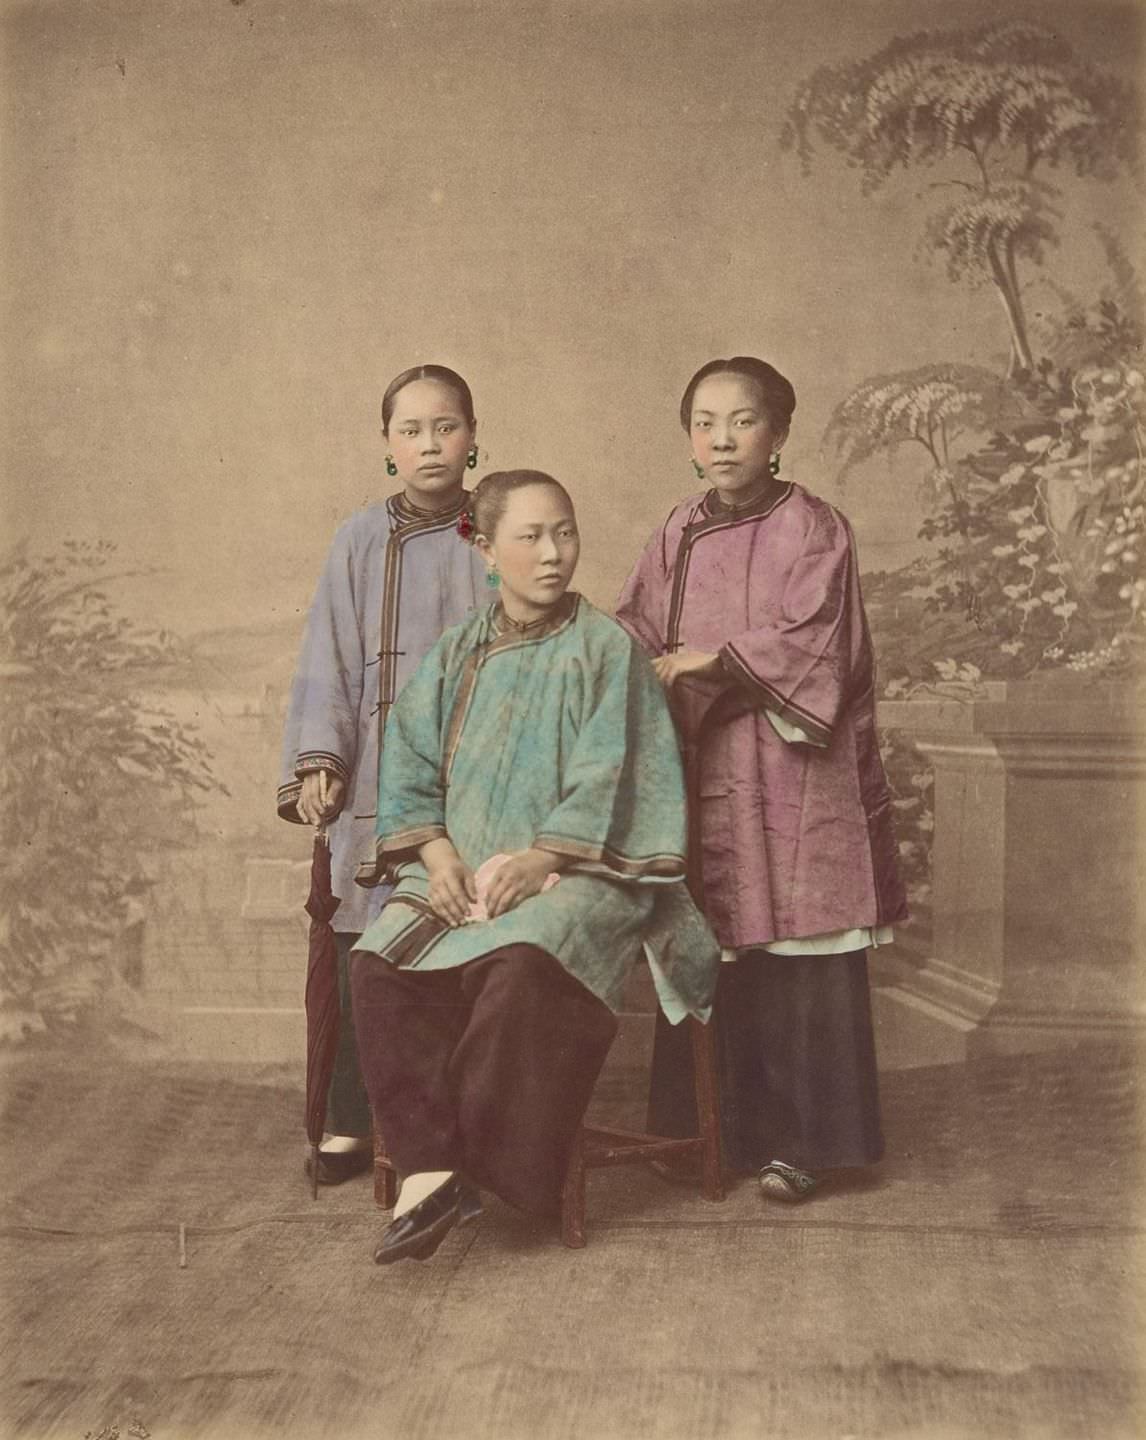 Spectacular Hand-Colored Portraits Of Mid-1870s Chinese People